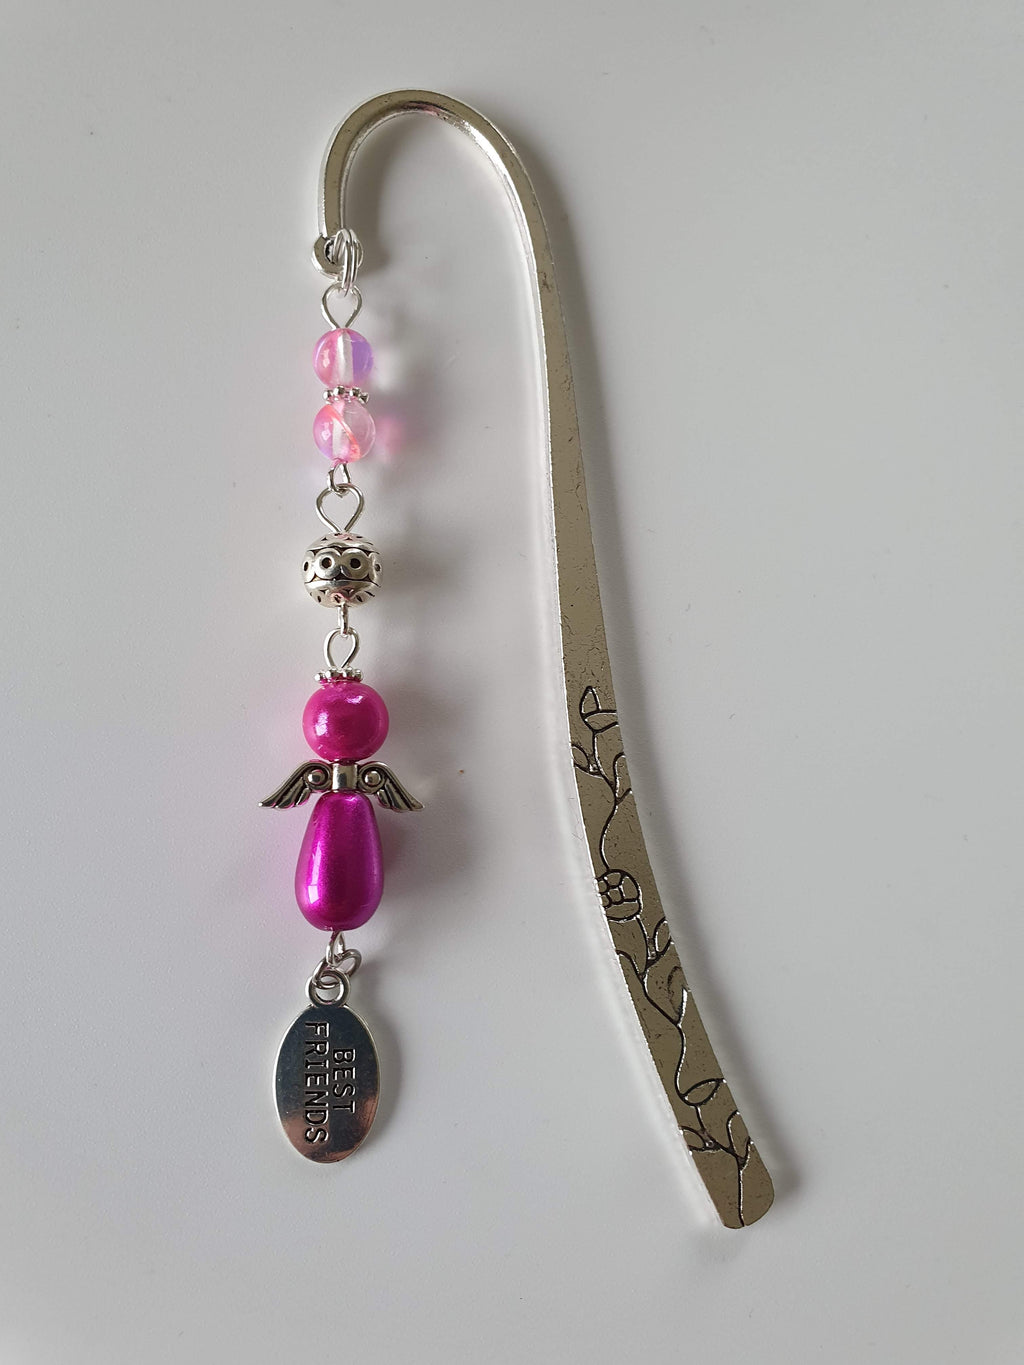 This is a picture of a silver bookmark with a pink angel and a 'best friends' charm